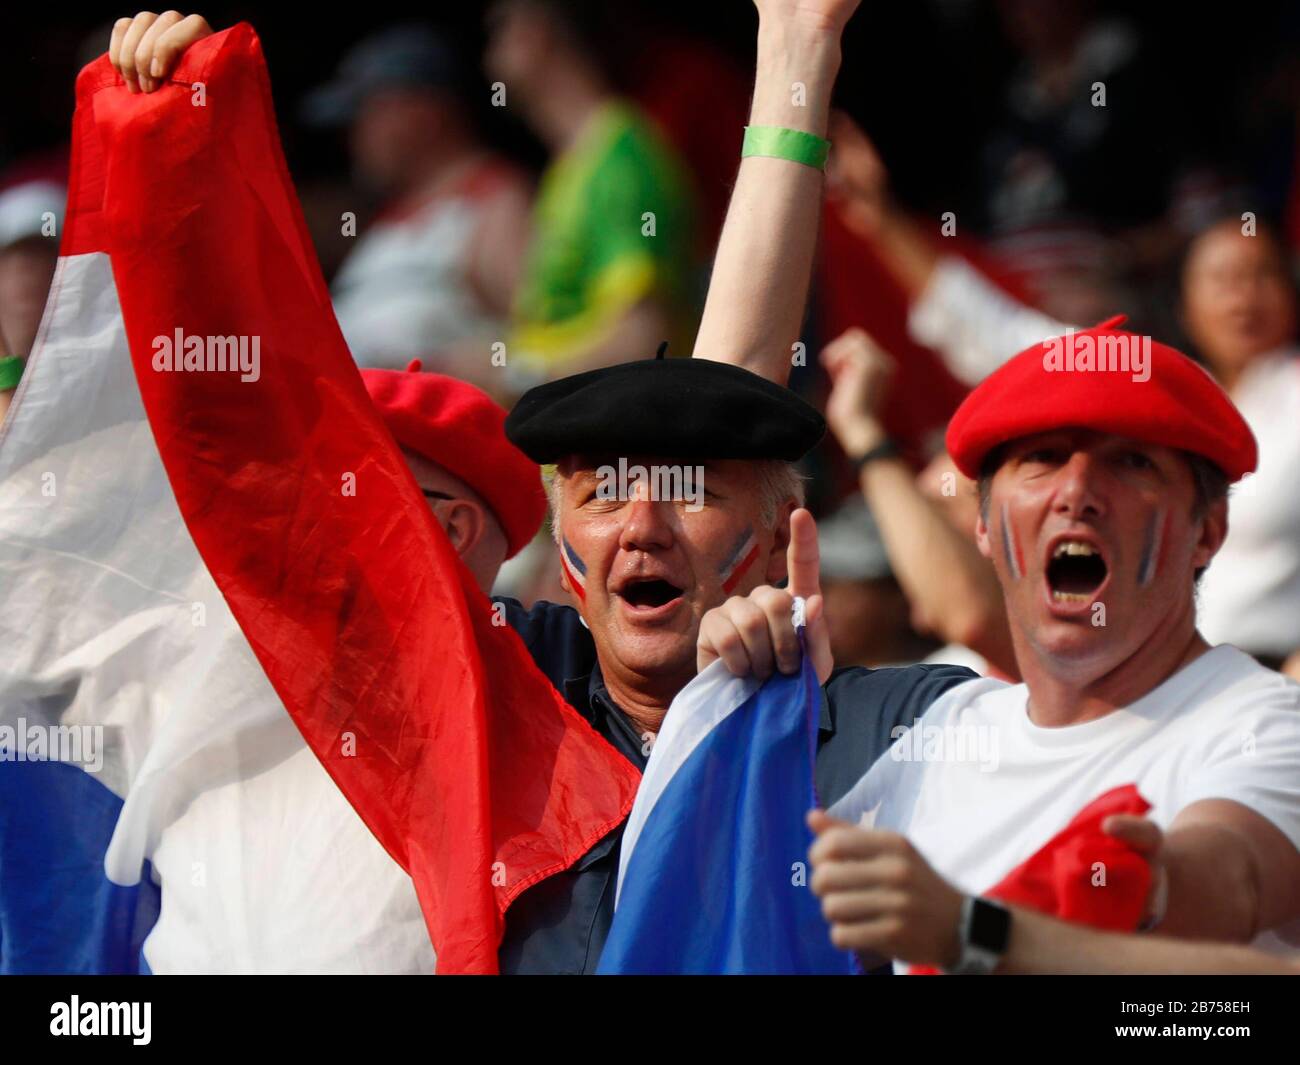 Fans of France reacts during the match between France and Samao in the HSBC World Rugby Sevens Series on Day 3 at Hong Kong Stadium. Stock Photo